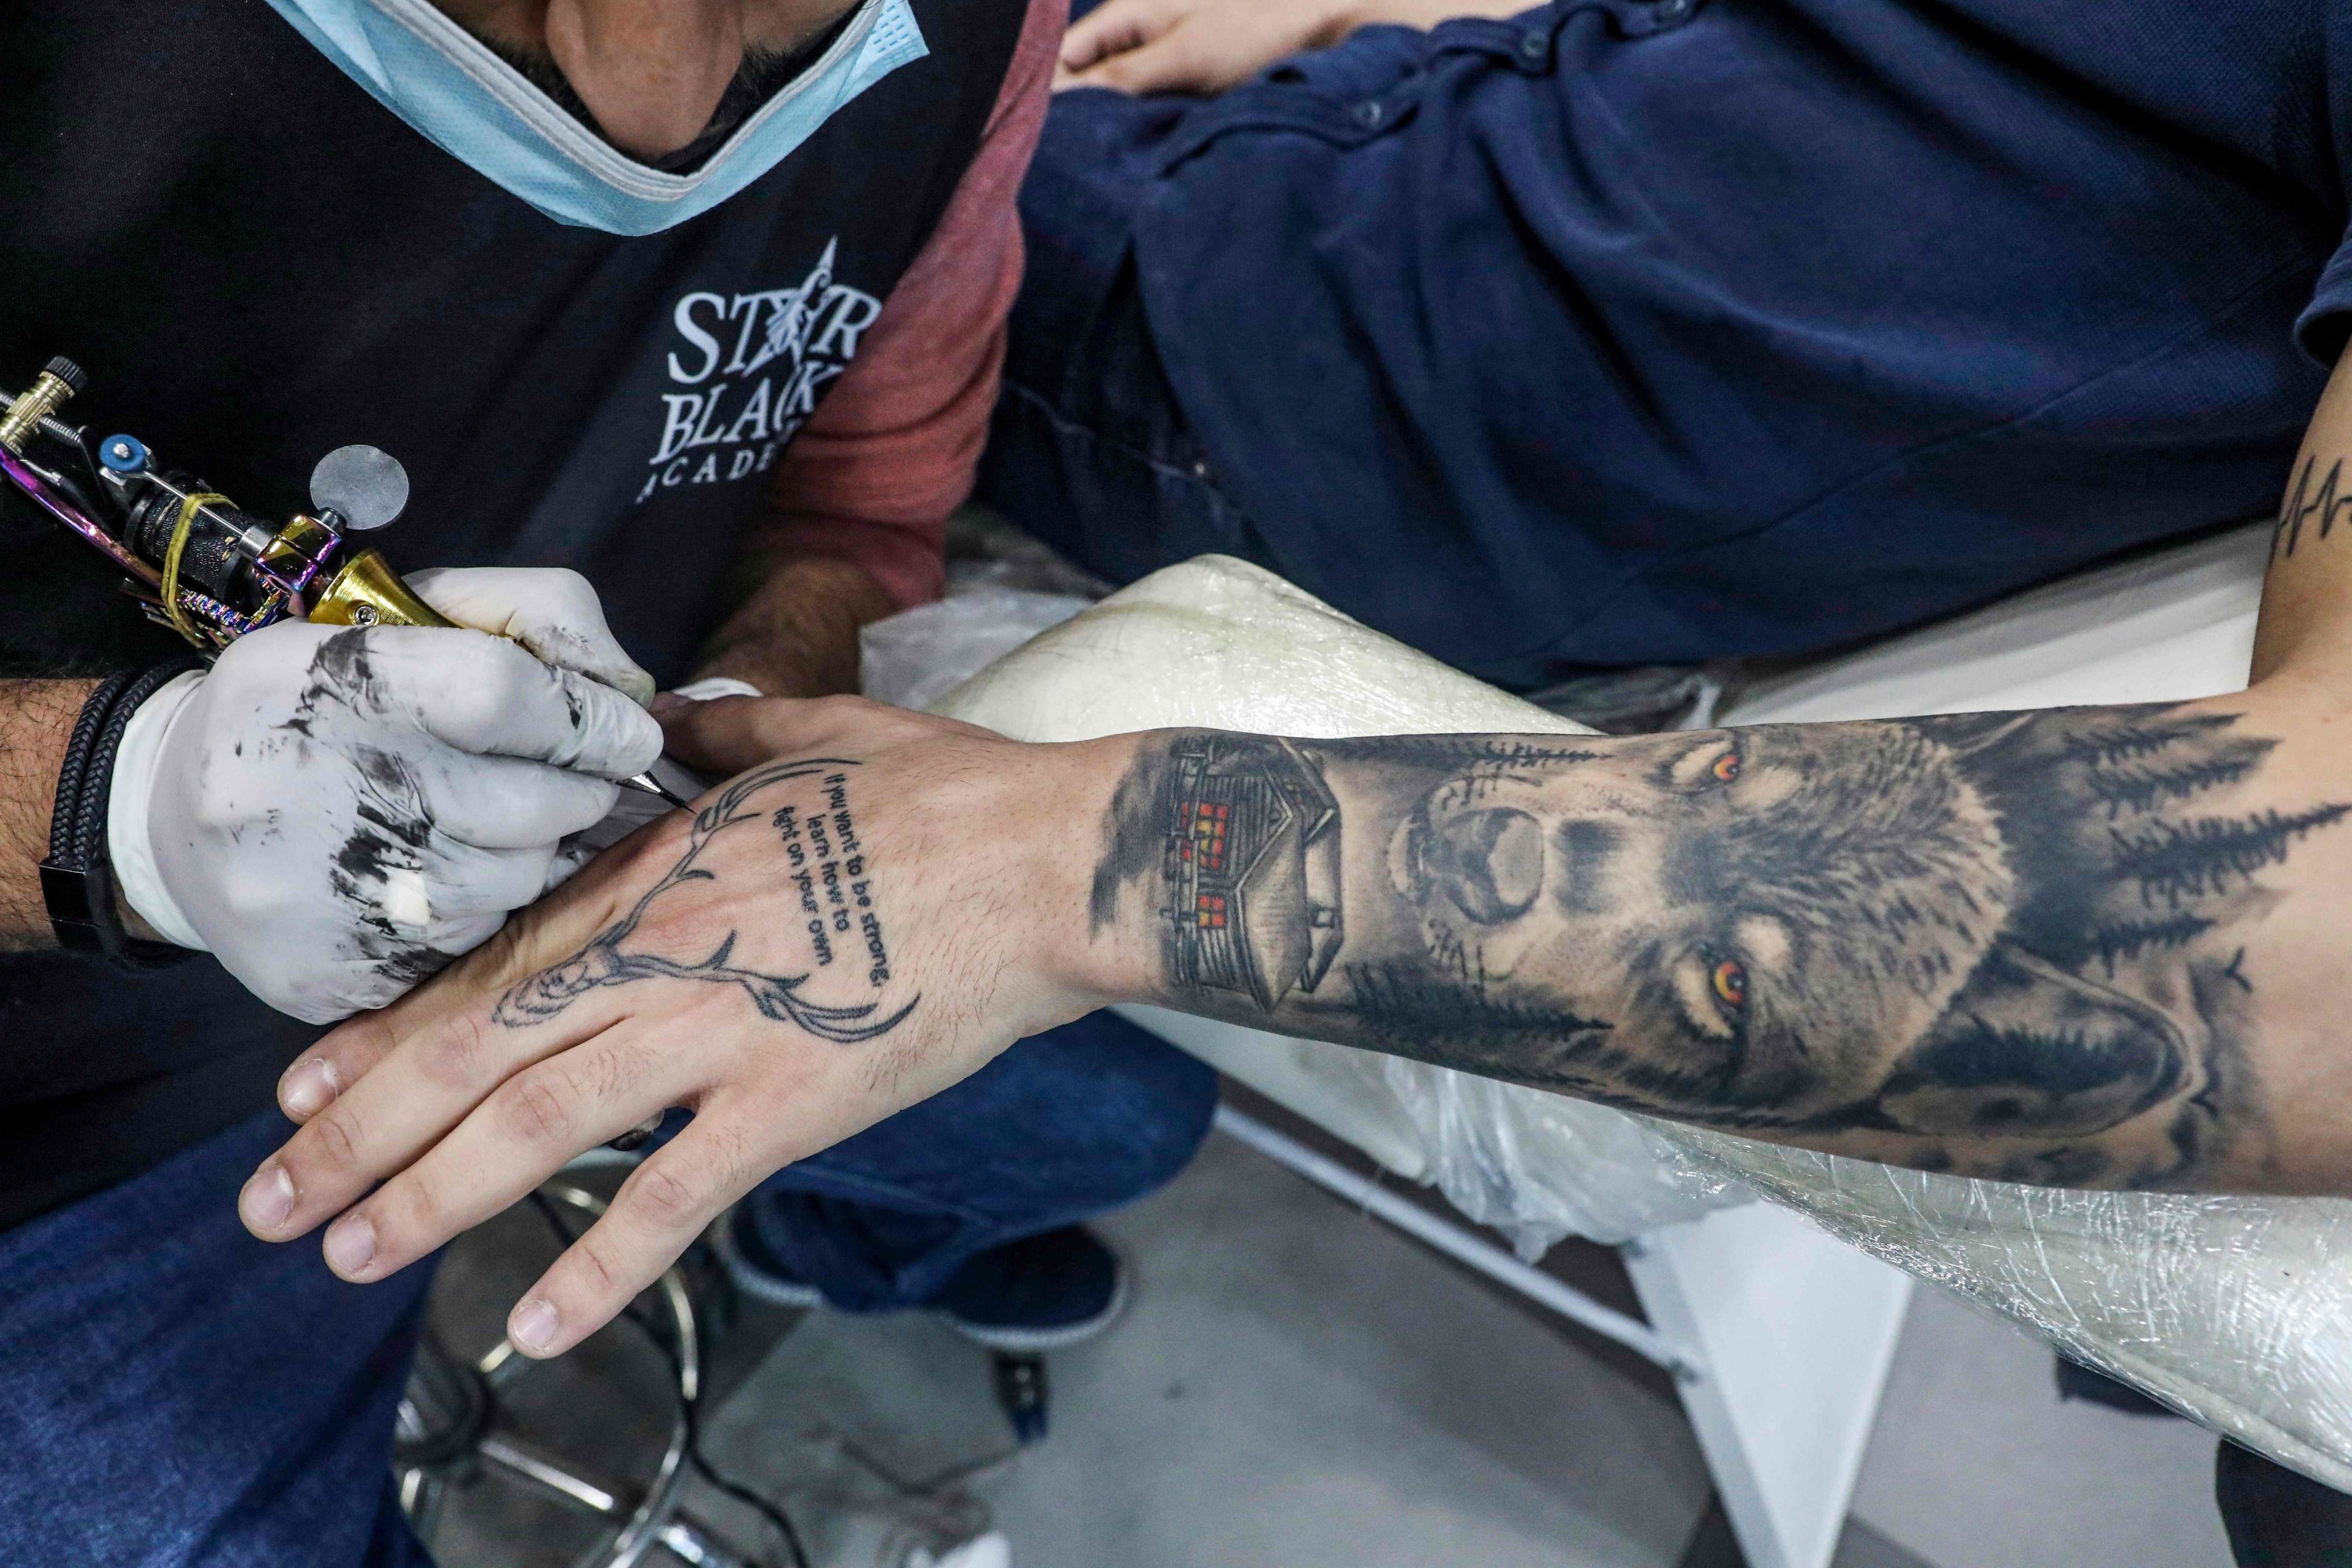 75% of tattoo inks contain carcinogens, toxic chemicals: Report